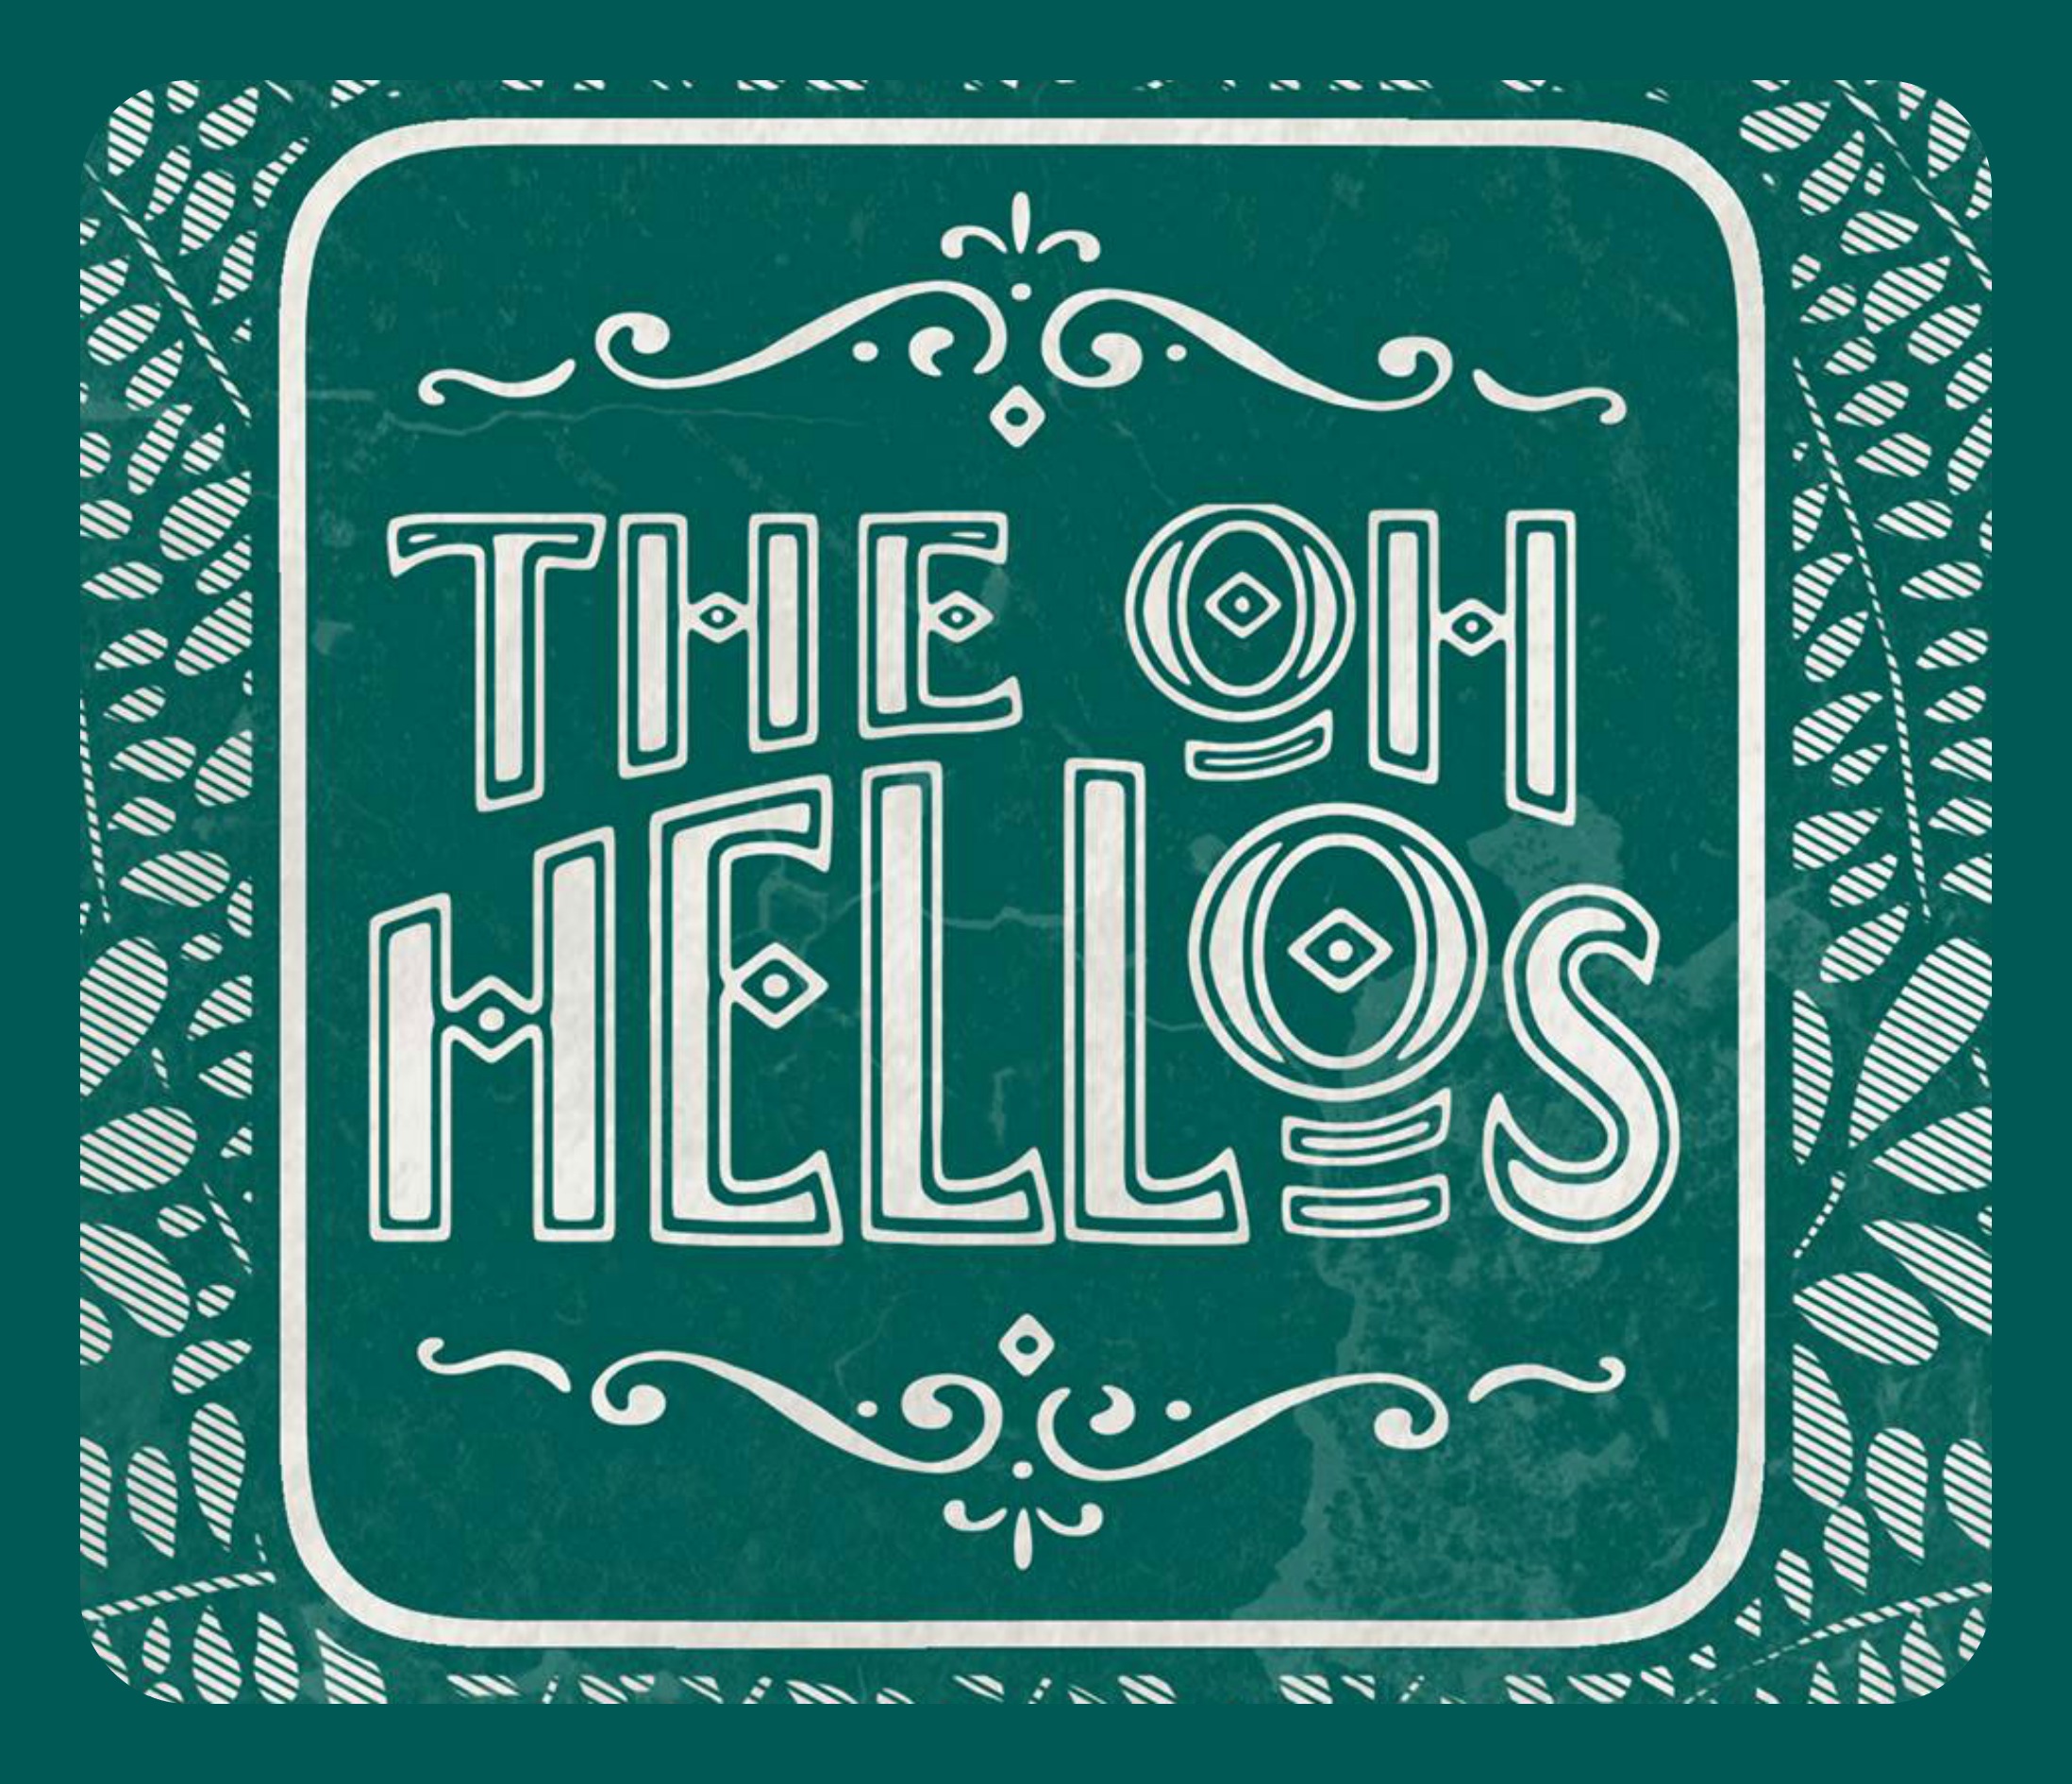 The oh hellos